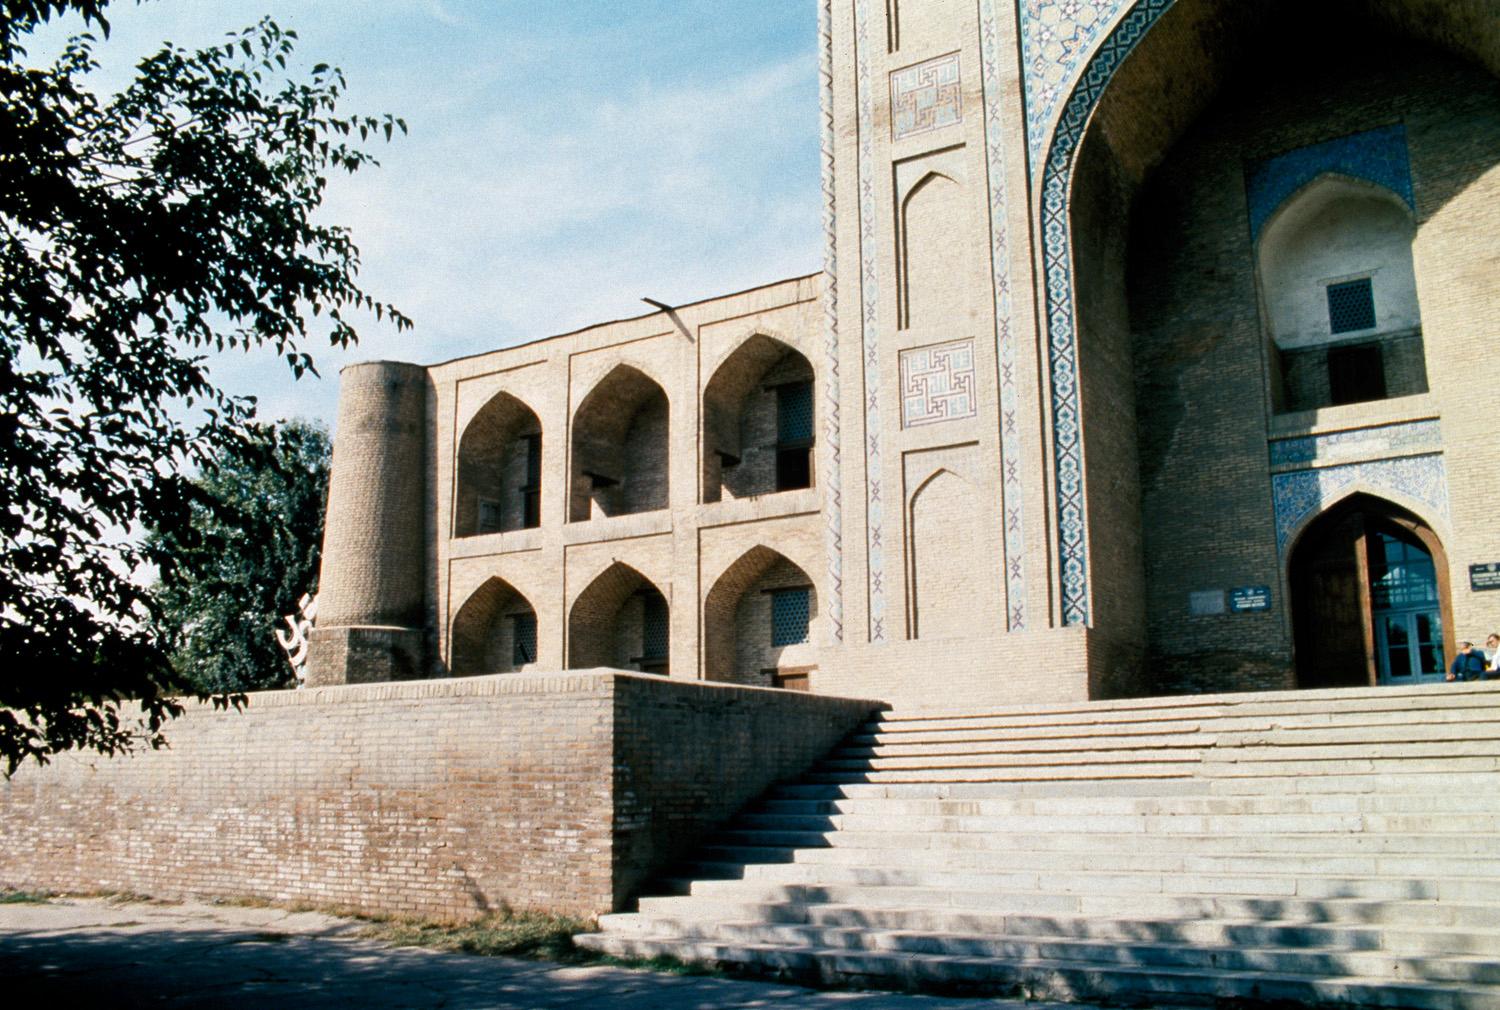 View of entry façade with stairs leading up to the portal